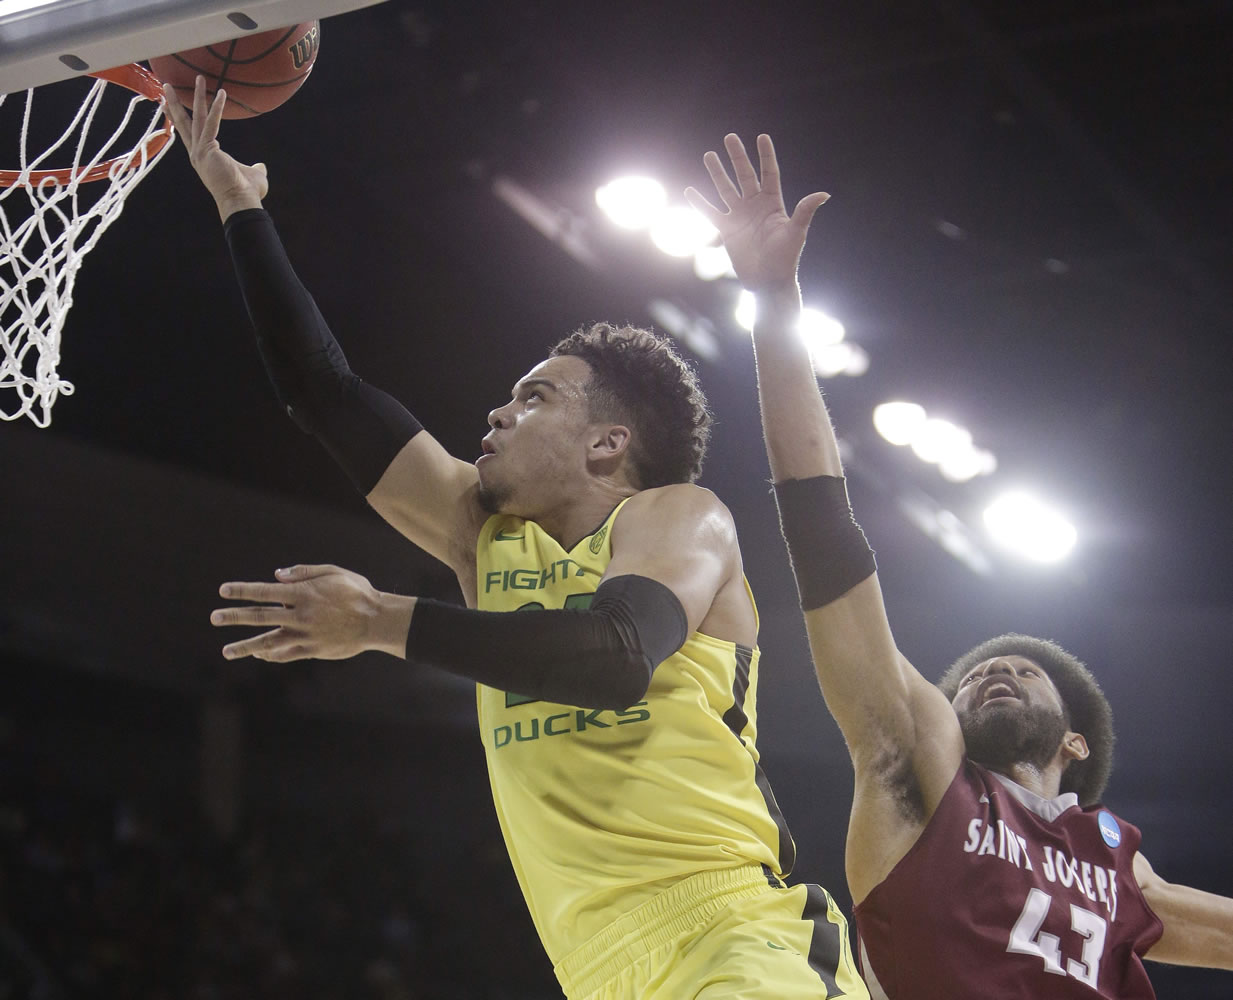 Oregon forward Dillon Brooks, left, shoots against Saint Joseph's forward DeAndre Bembry (43) during the first half of a second-round men's college basketball game in the NCAA Tournament in Spokane, Wash., Sunday, March 20, 2016.